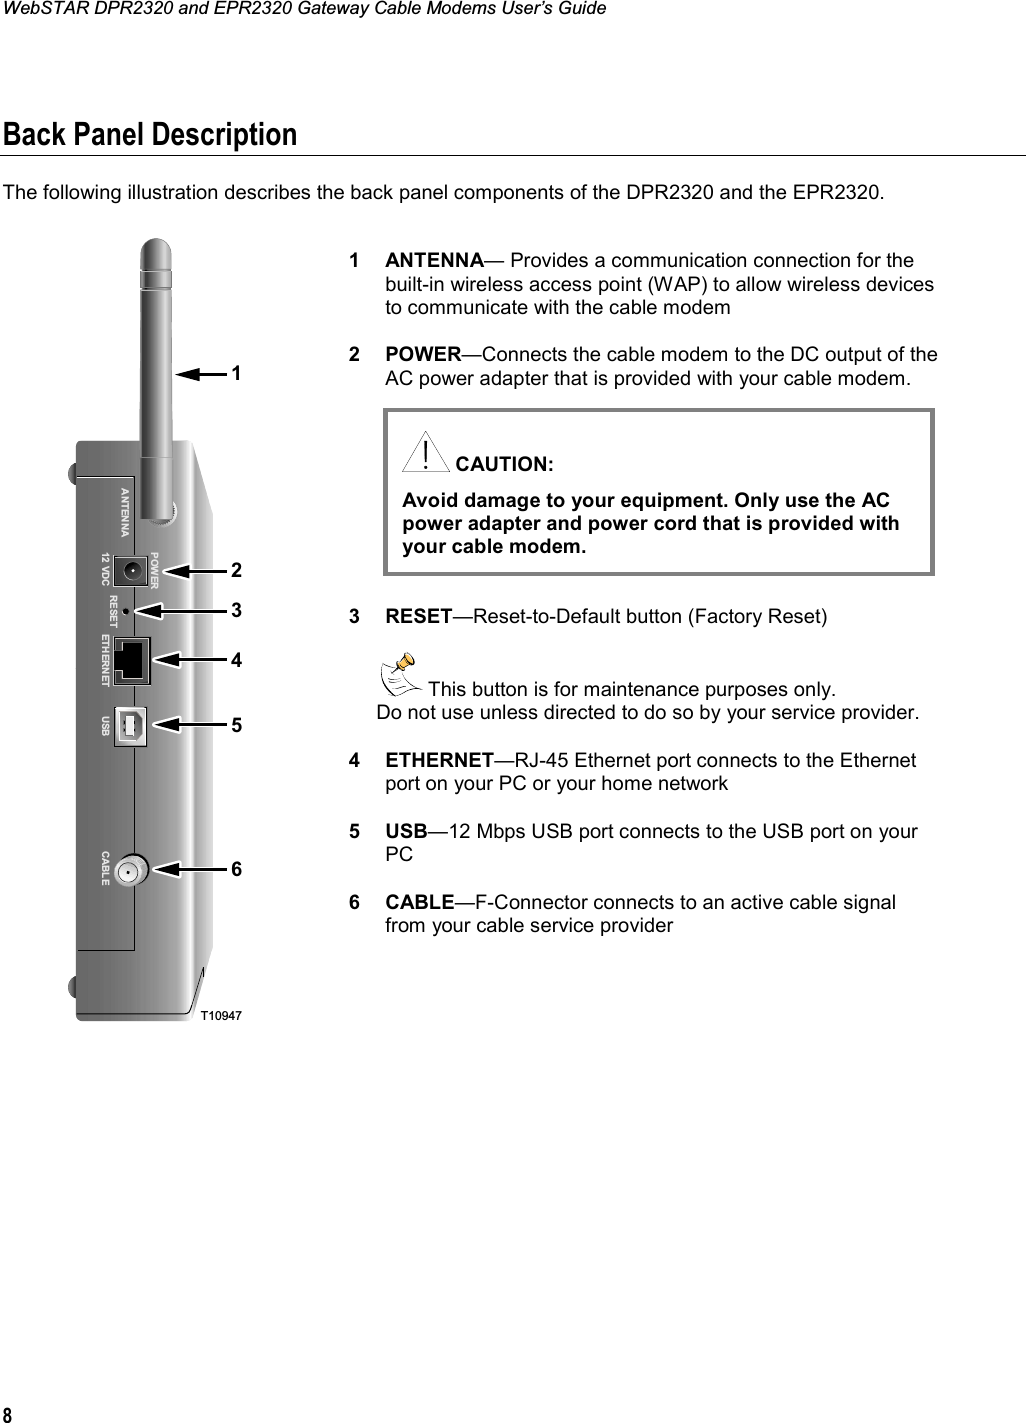 WebSTAR DPR2320 and EPR2320 Gateway Cable Modems User’s Guide 8Back Panel Description The following illustration describes the back panel components of the DPR2320 and the EPR2320.  T1094721456POWERANTENNA12 VDC RESET ETHERNET CABLEUSB31 ANTENNA— Provides a communication connection for the built-in wireless access point (WAP) to allow wireless devices to communicate with the cable modem 2 POWER—Connects the cable modem to the DC output of the AC power adapter that is provided with your cable modem.  3 RESET—Reset-to-Default button (Factory Reset)   This button is for maintenance purposes only.  Do not use unless directed to do so by your service provider. 4 ETHERNET—RJ-45 Ethernet port connects to the Ethernet port on your PC or your home network 5 USB—12 Mbps USB port connects to the USB port on your PC6 CABLE—F-Connector connects to an active cable signal from your cable service provider  CAUTION: Avoid damage to your equipment. Only use the AC power adapter and power cord that is provided with your cable modem.  